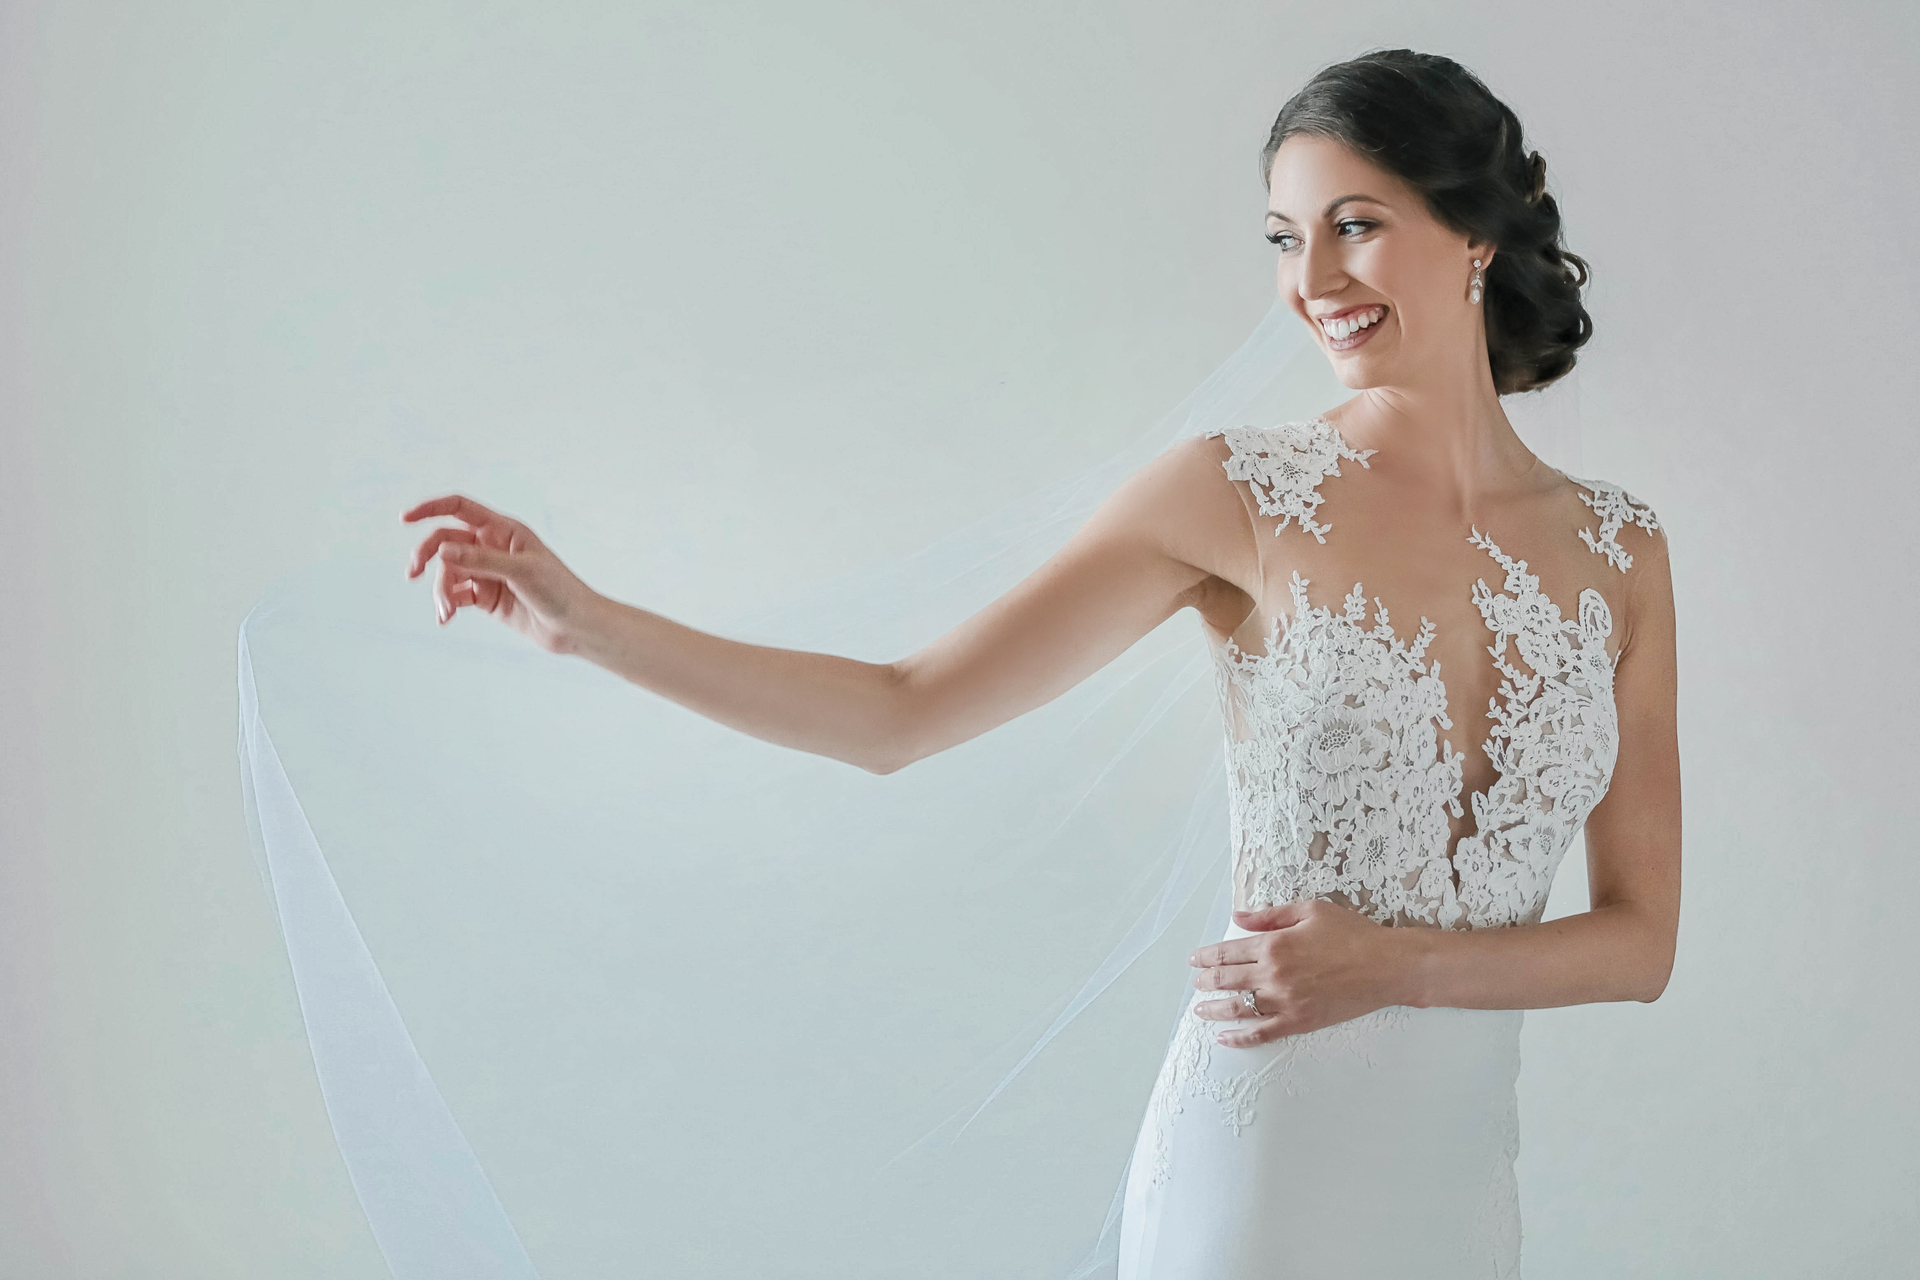 Sydney bride in stunning lace wedding dress and veil